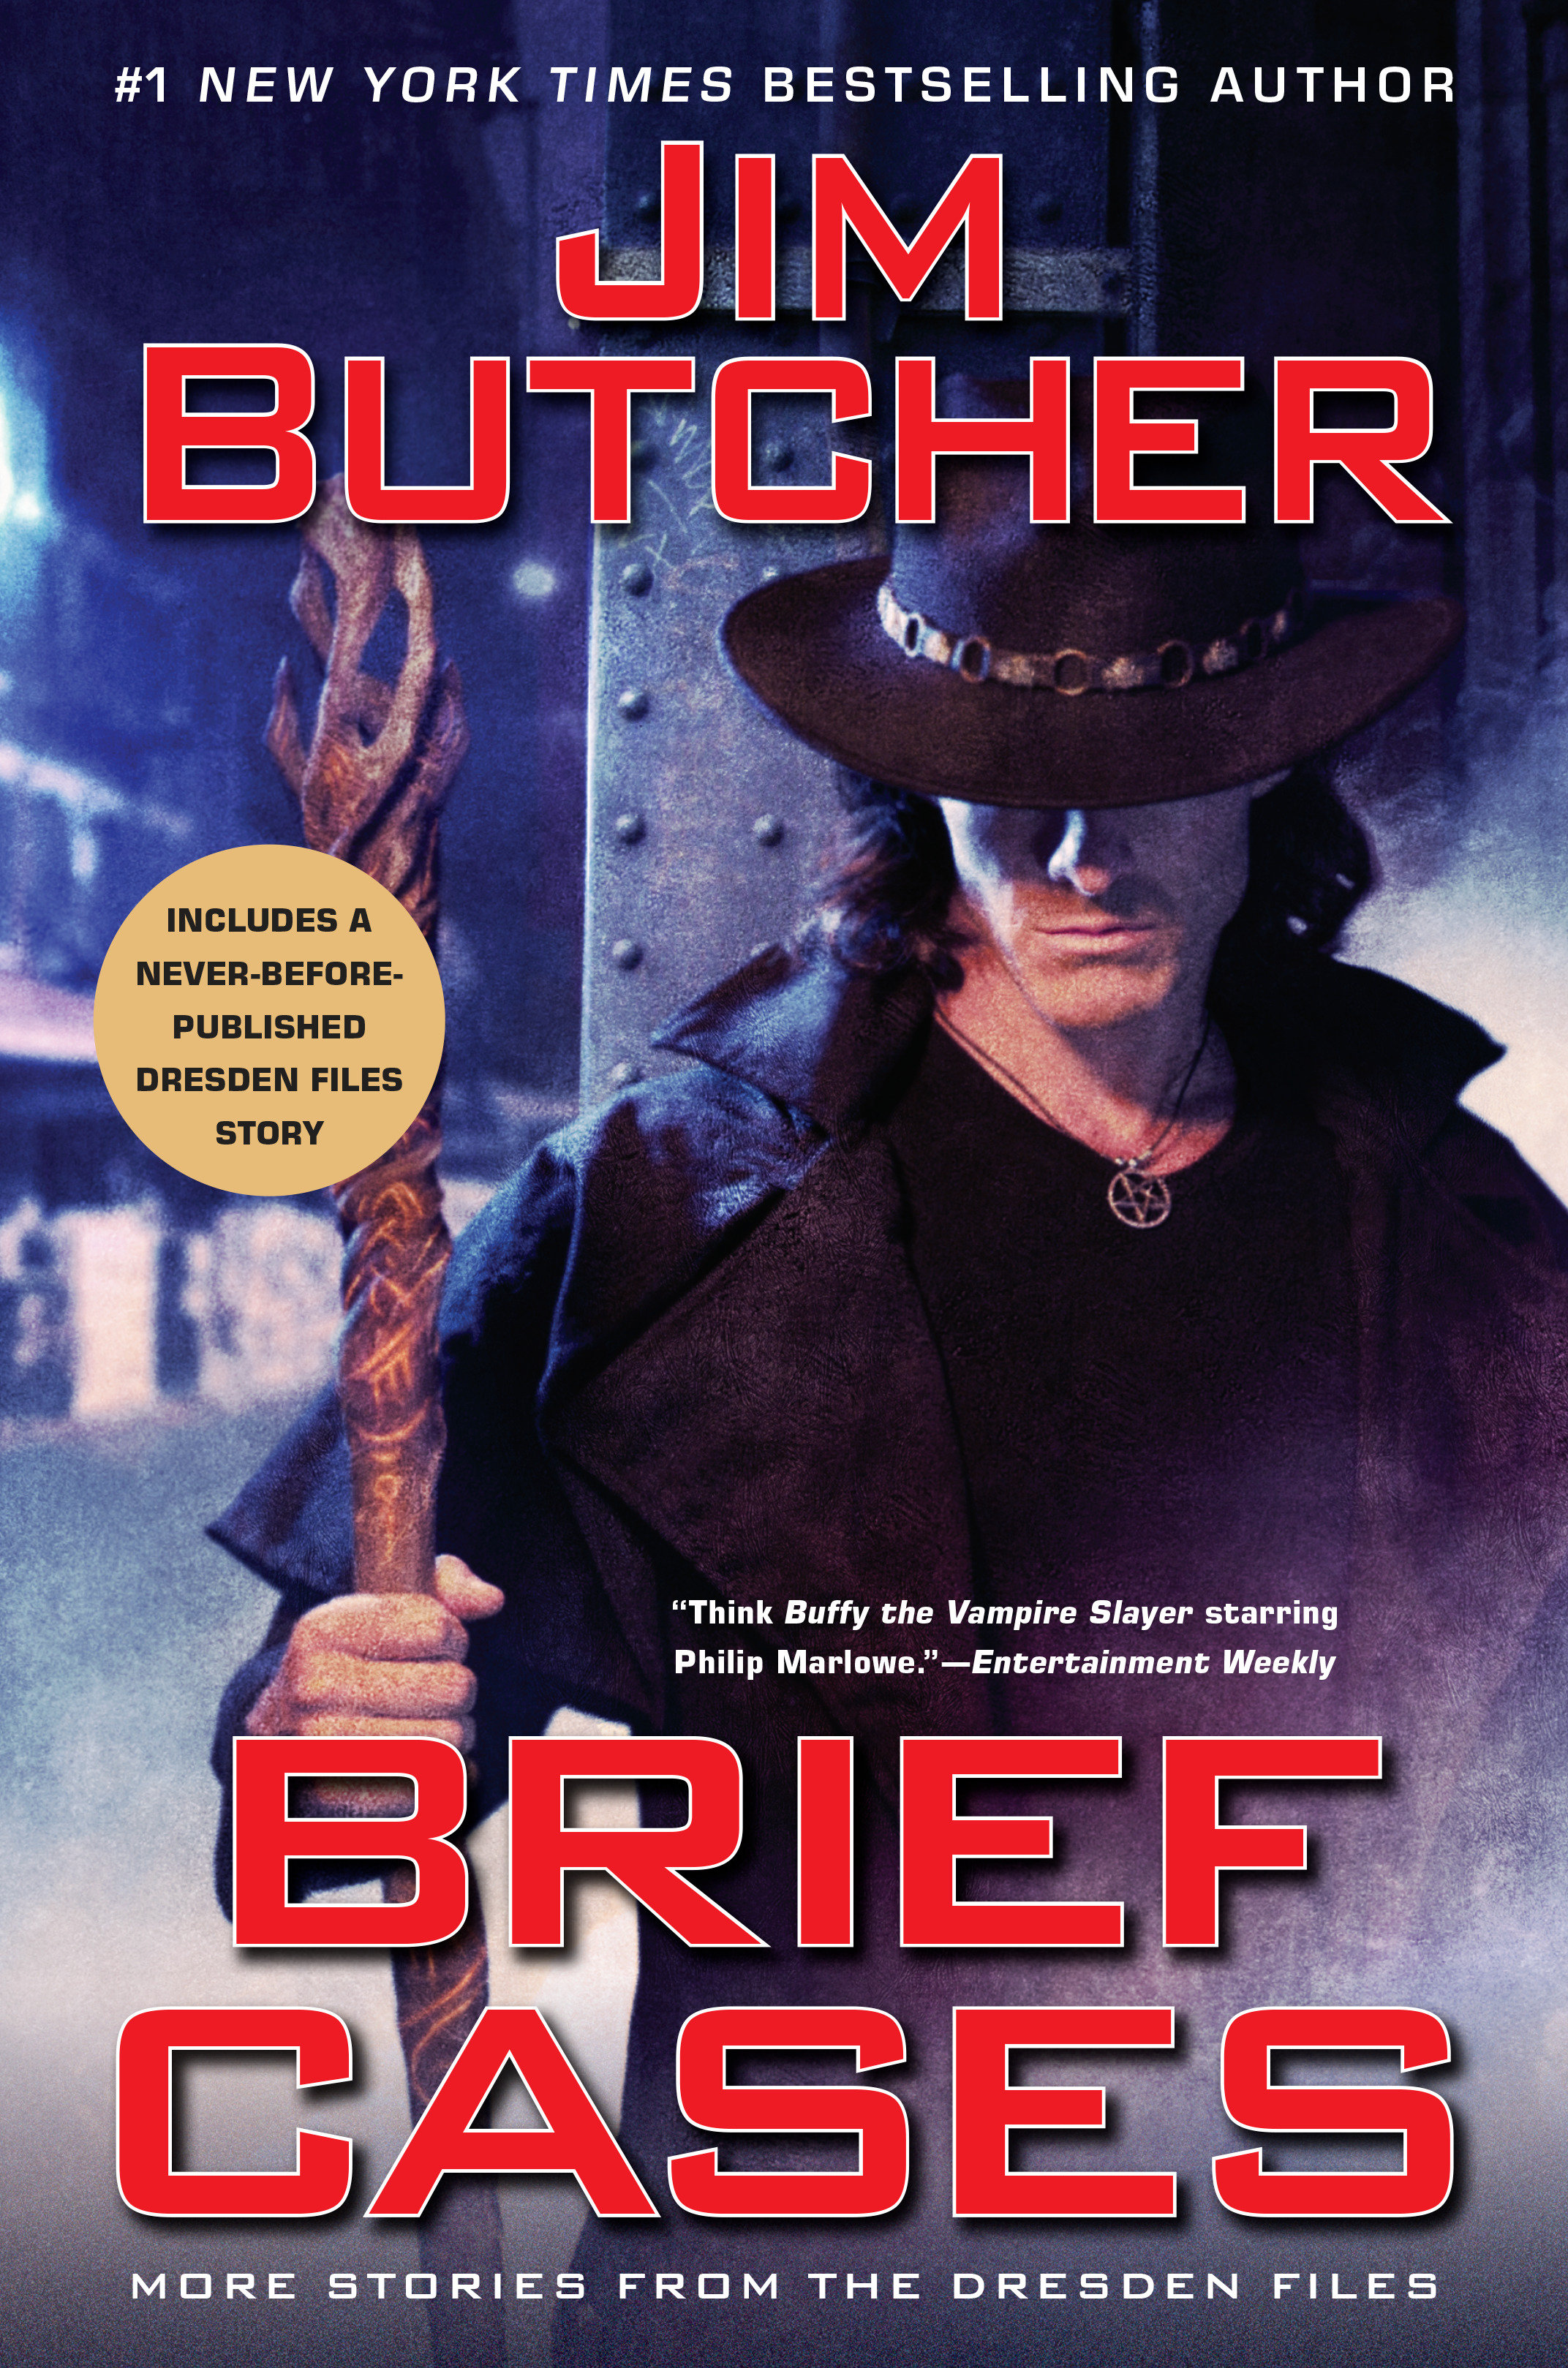 Brief cases more stories from the Dresden files cover image